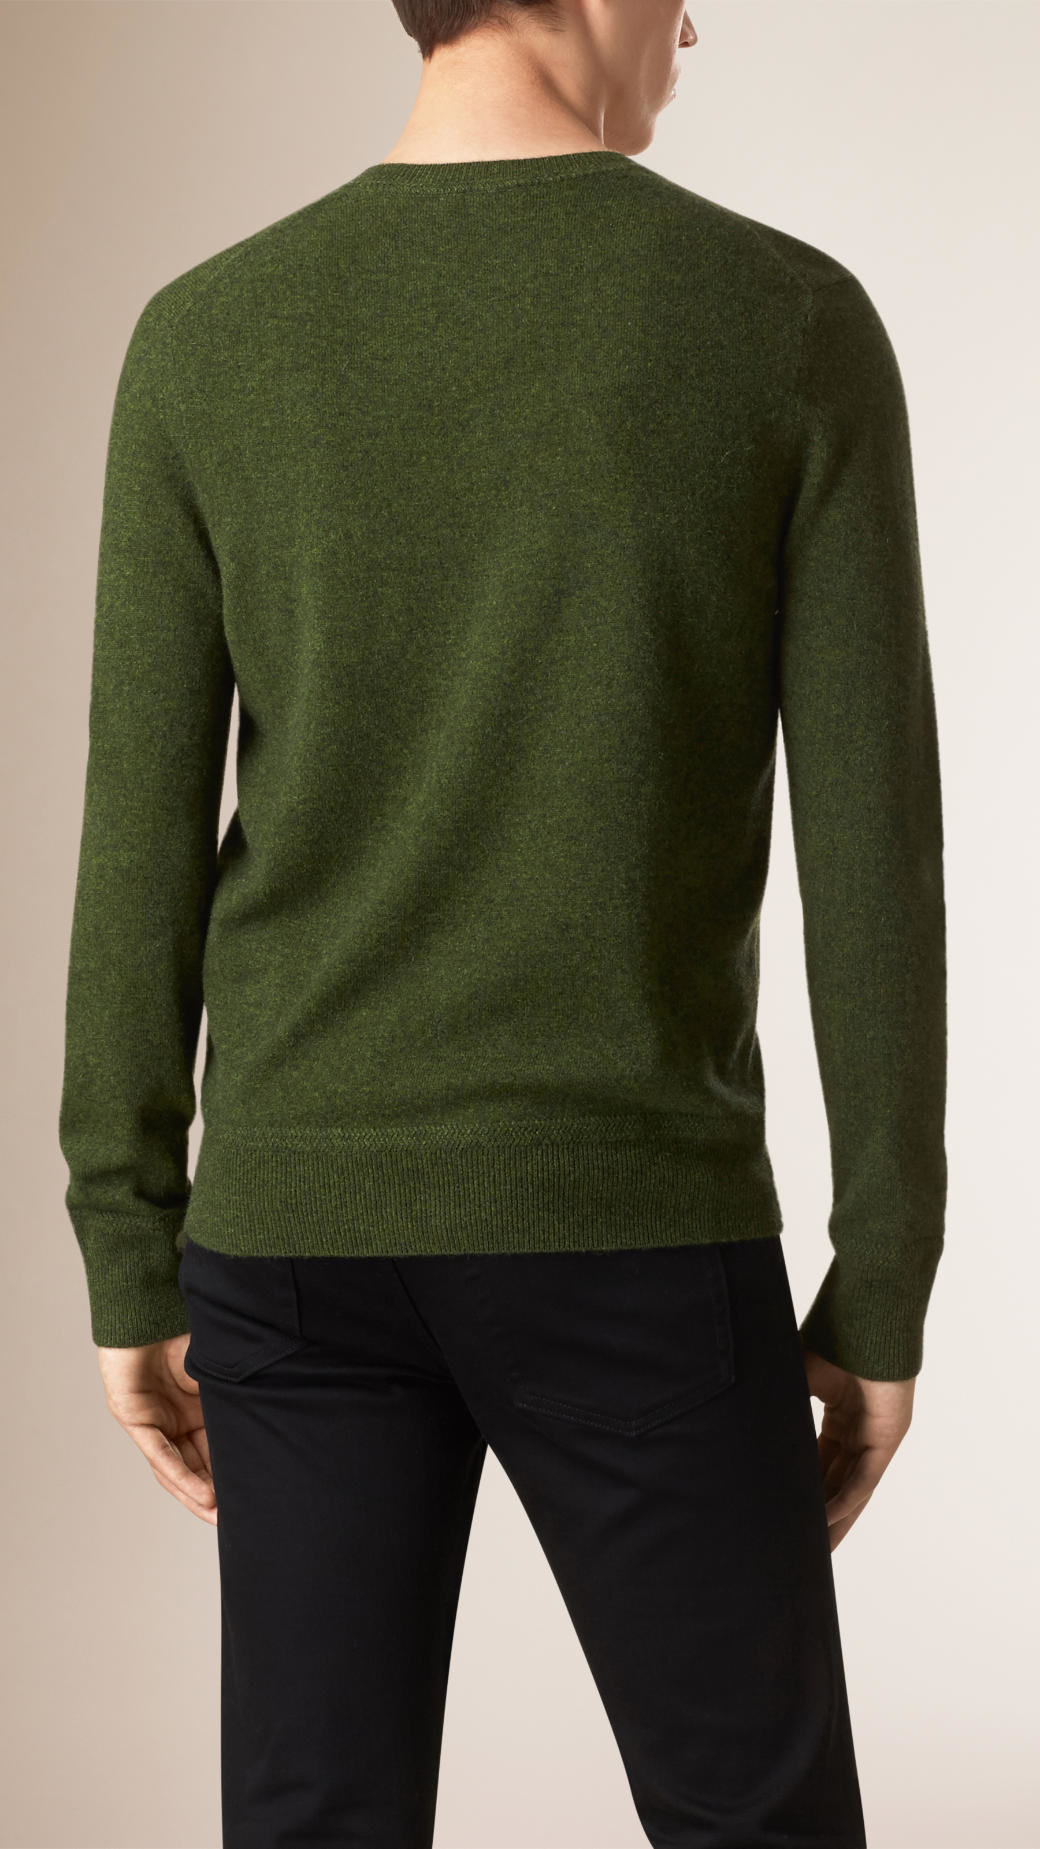 Lyst - Burberry Crew Neck Cashmere Sweater Olive Green in Green for Men